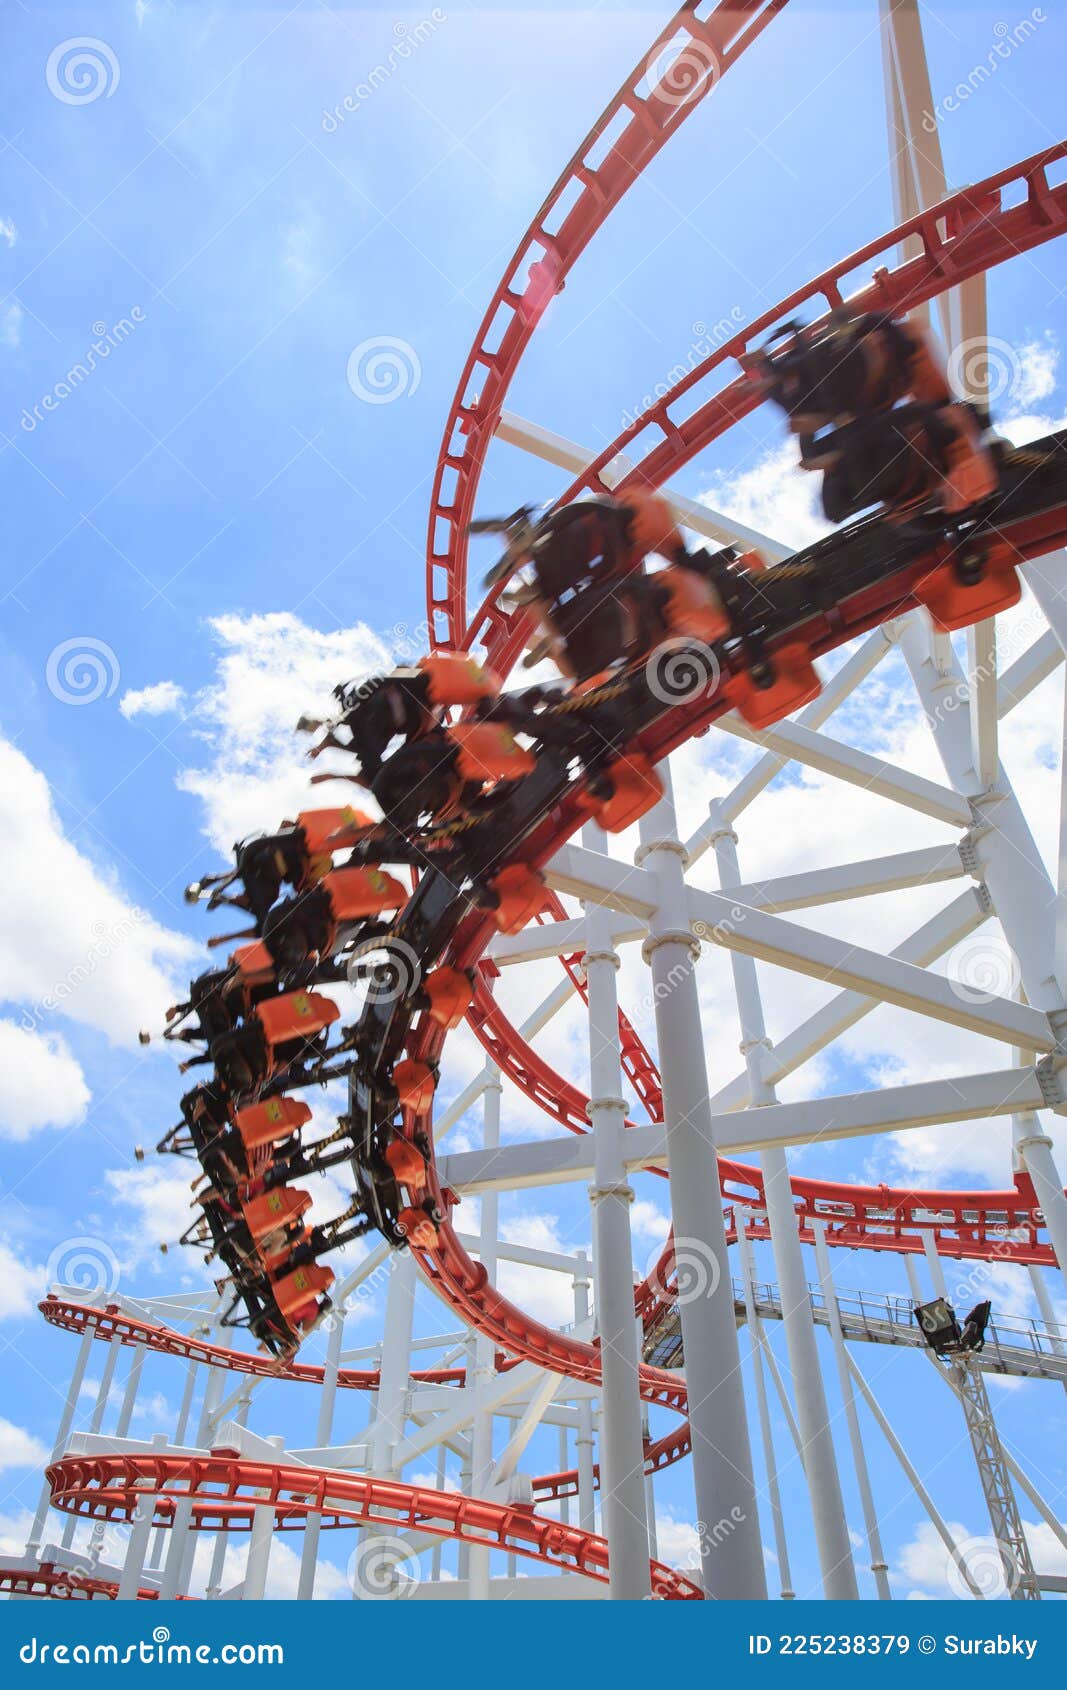 Red Roller Coaster Rail with Blue Sky in Background Stock Image - Image ...